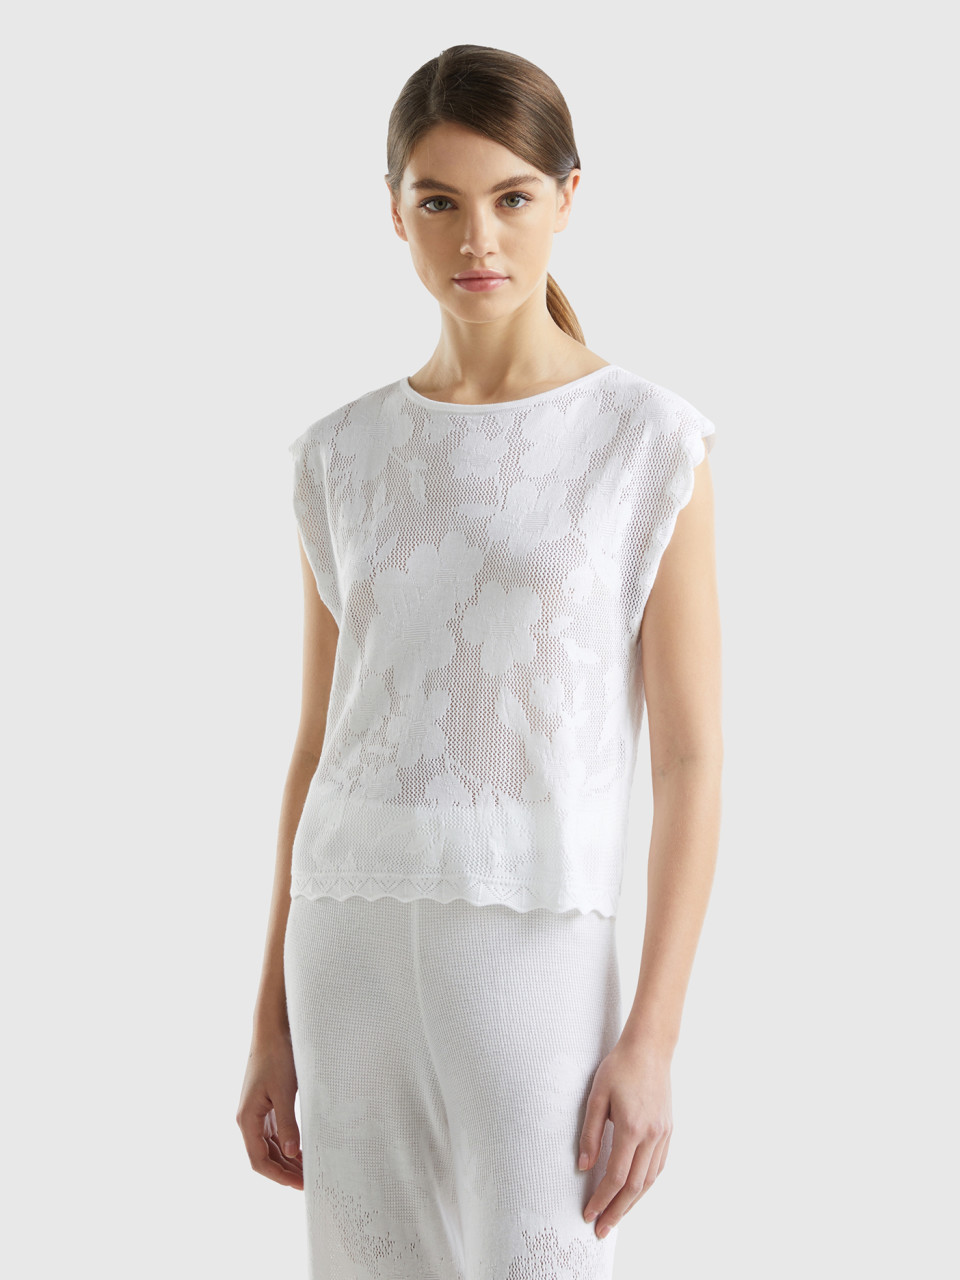 Benetton, Top With Floral Motif, White, Women